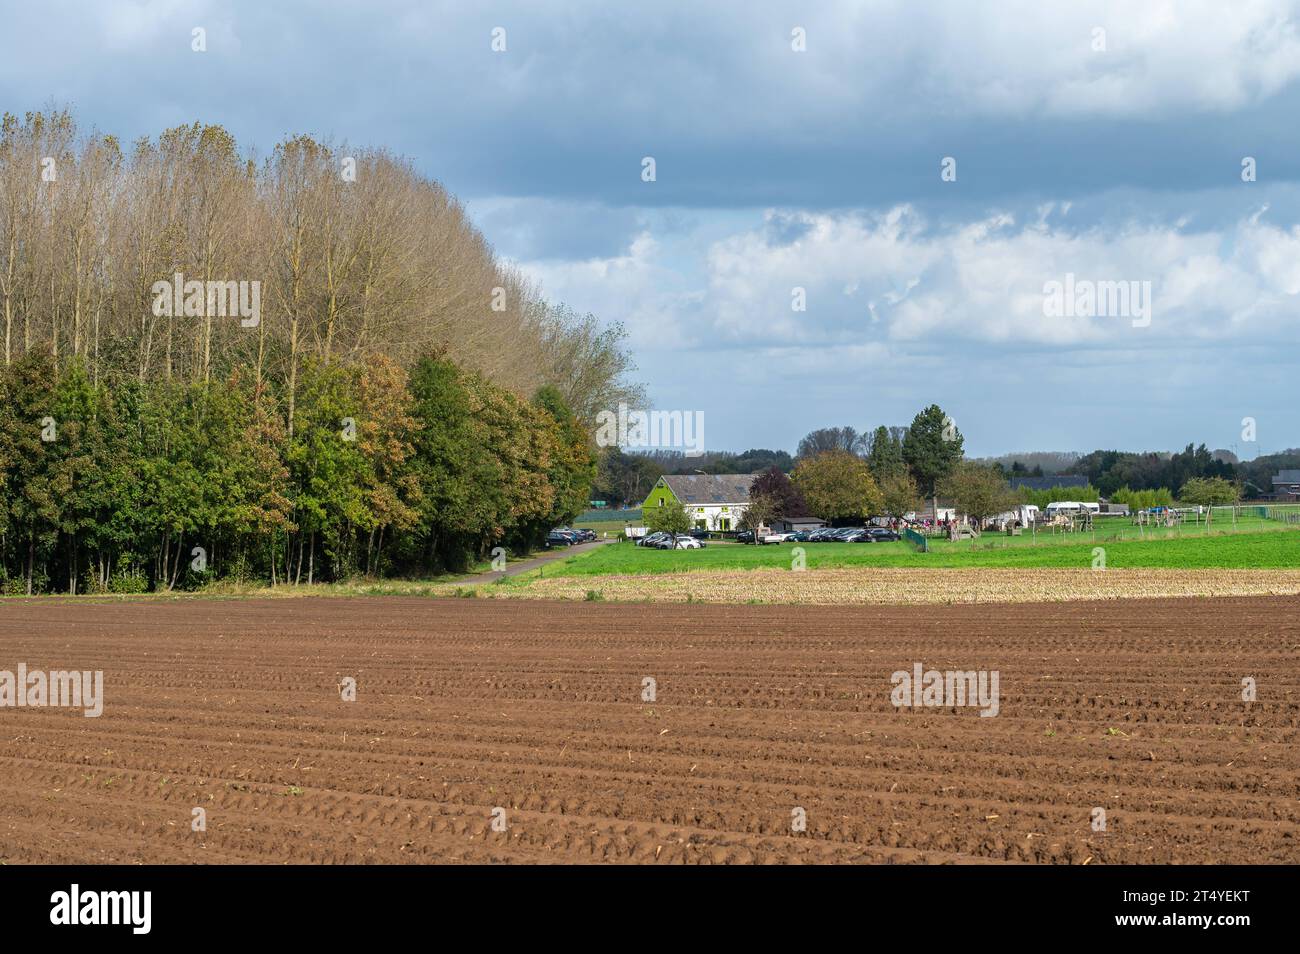 Asse, Flemish Brabant, Belgium, October 14, 2023 - Plowed land, trees and a parking lot at the Flemish countryside Credit: Imago/Alamy Live News Stock Photo